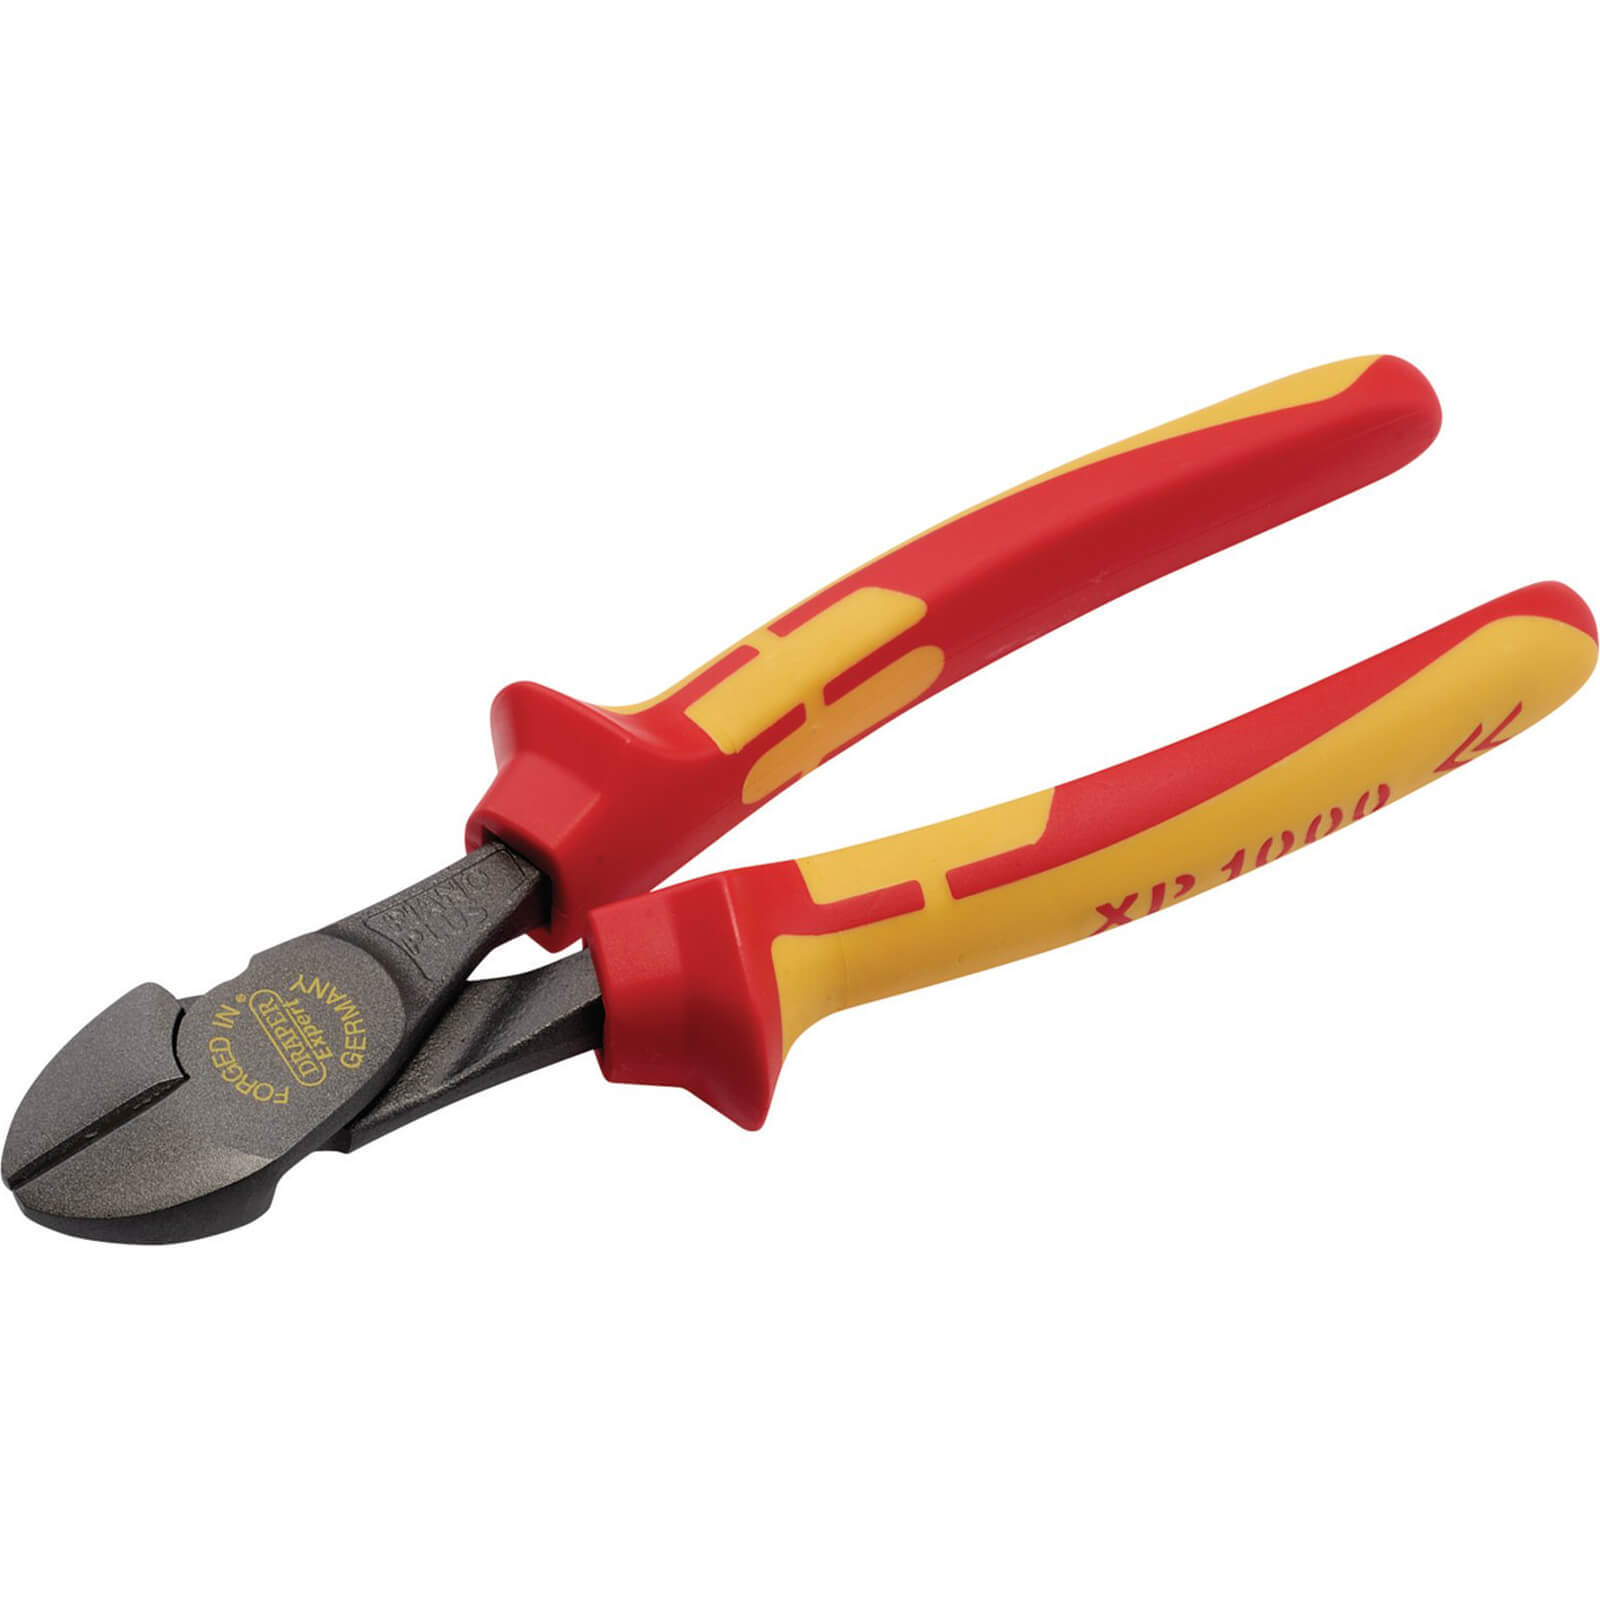 Photo of Draper Xp1000 Vde Insulated High Leverage Side Cutters 200mm